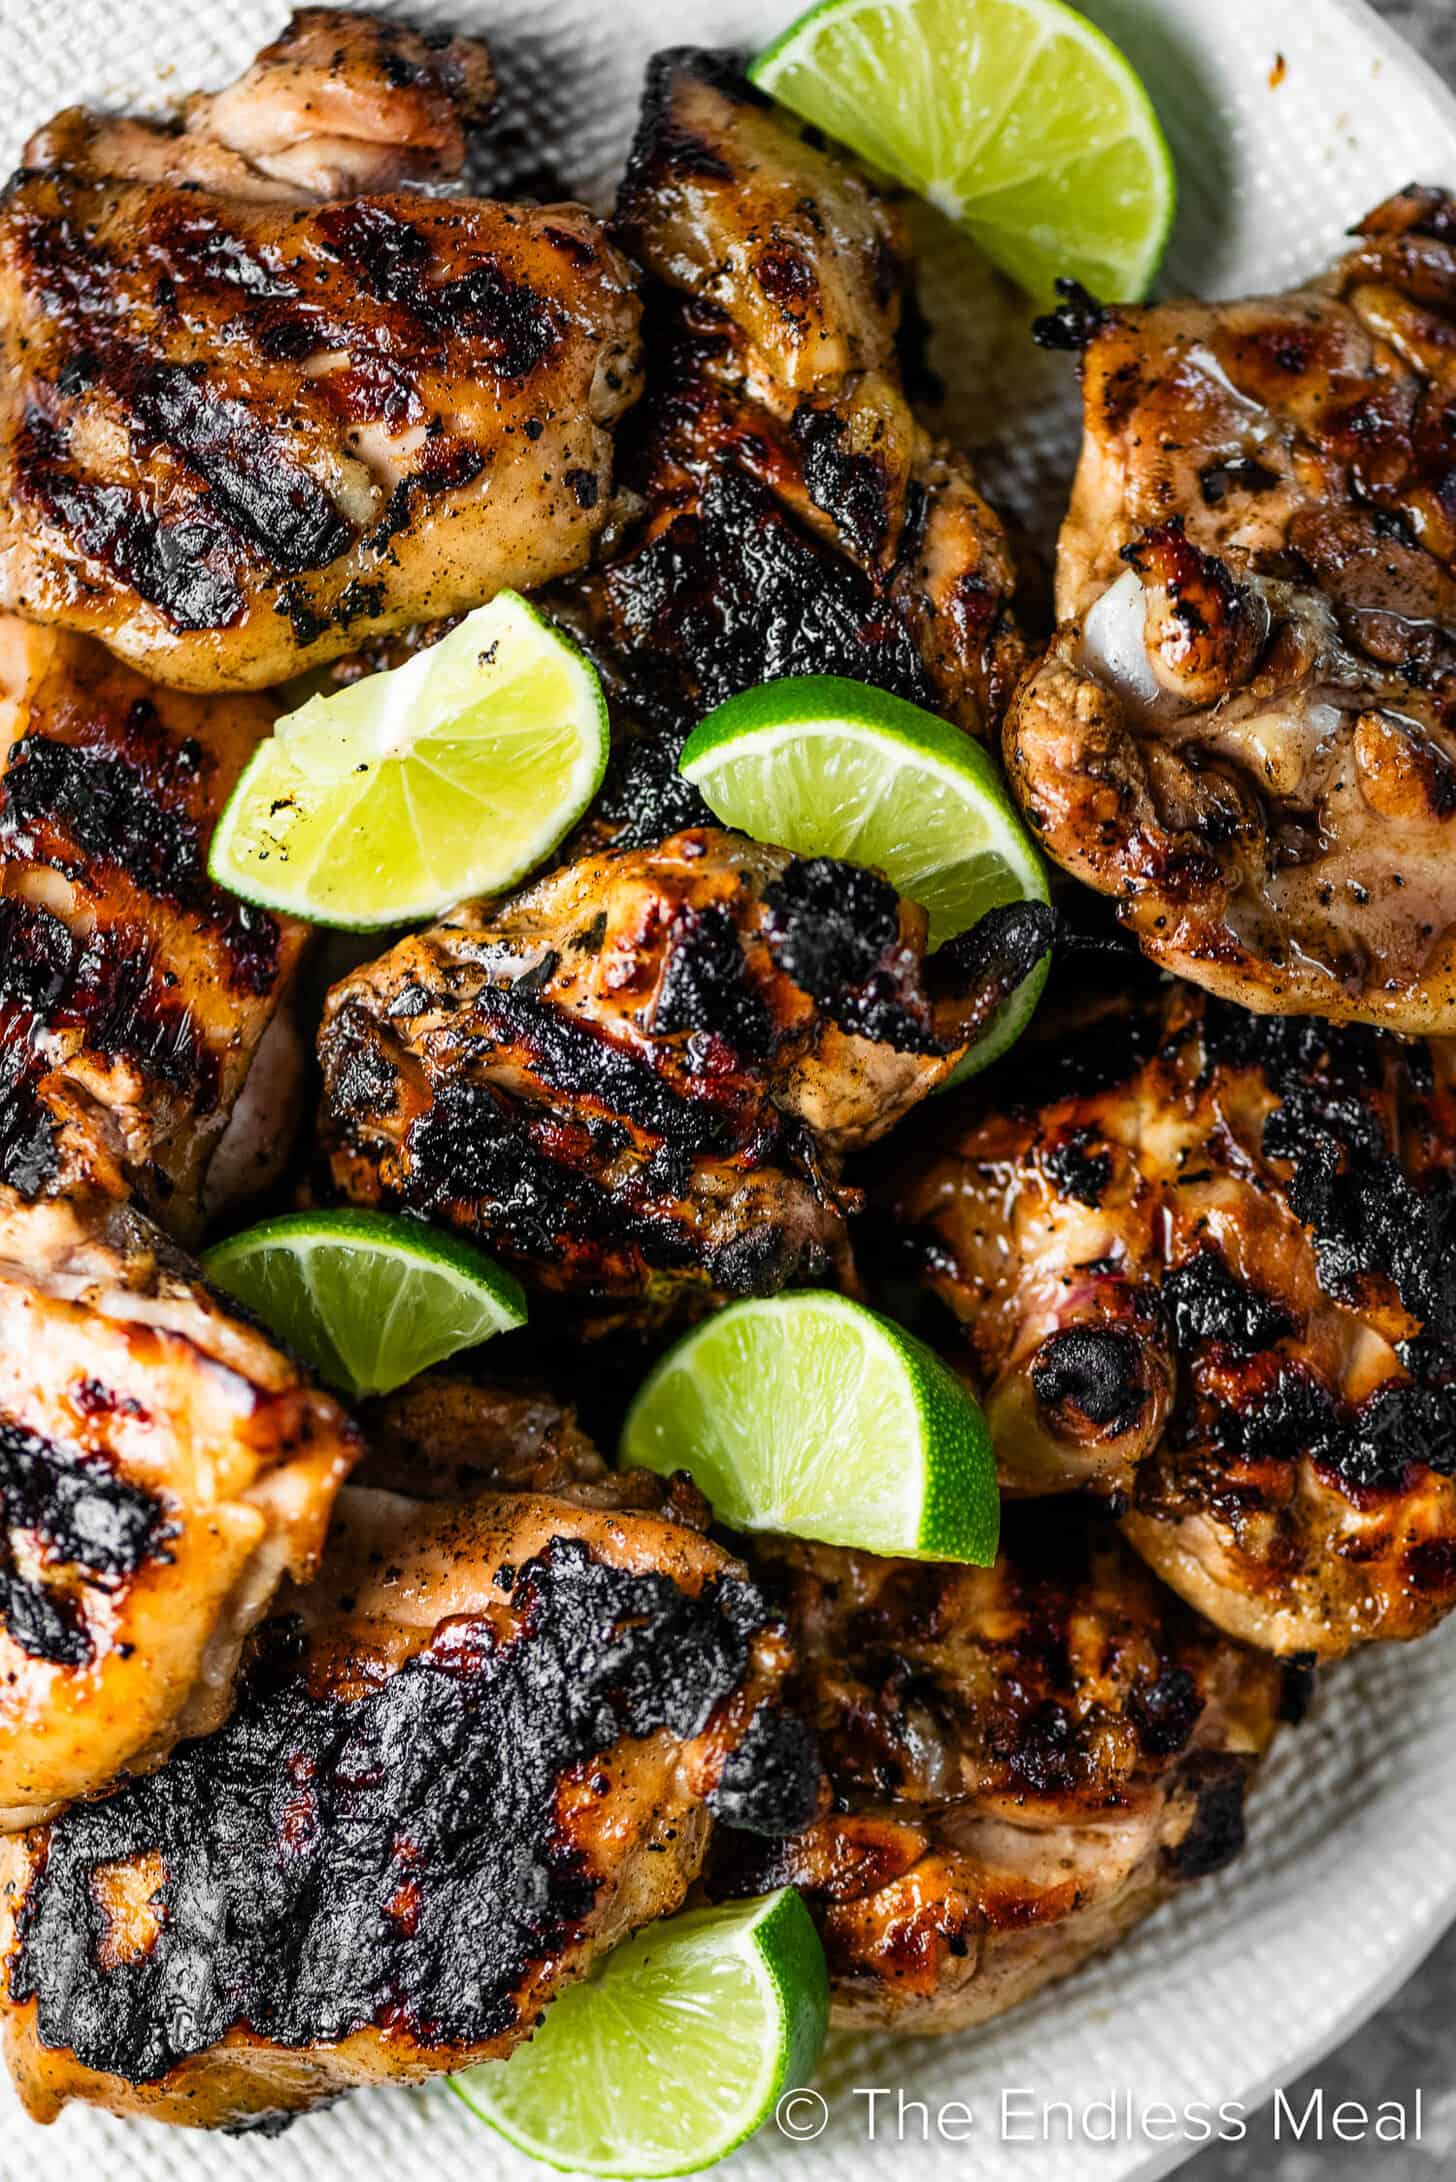 Margarita Chicken with limes on a serving plate